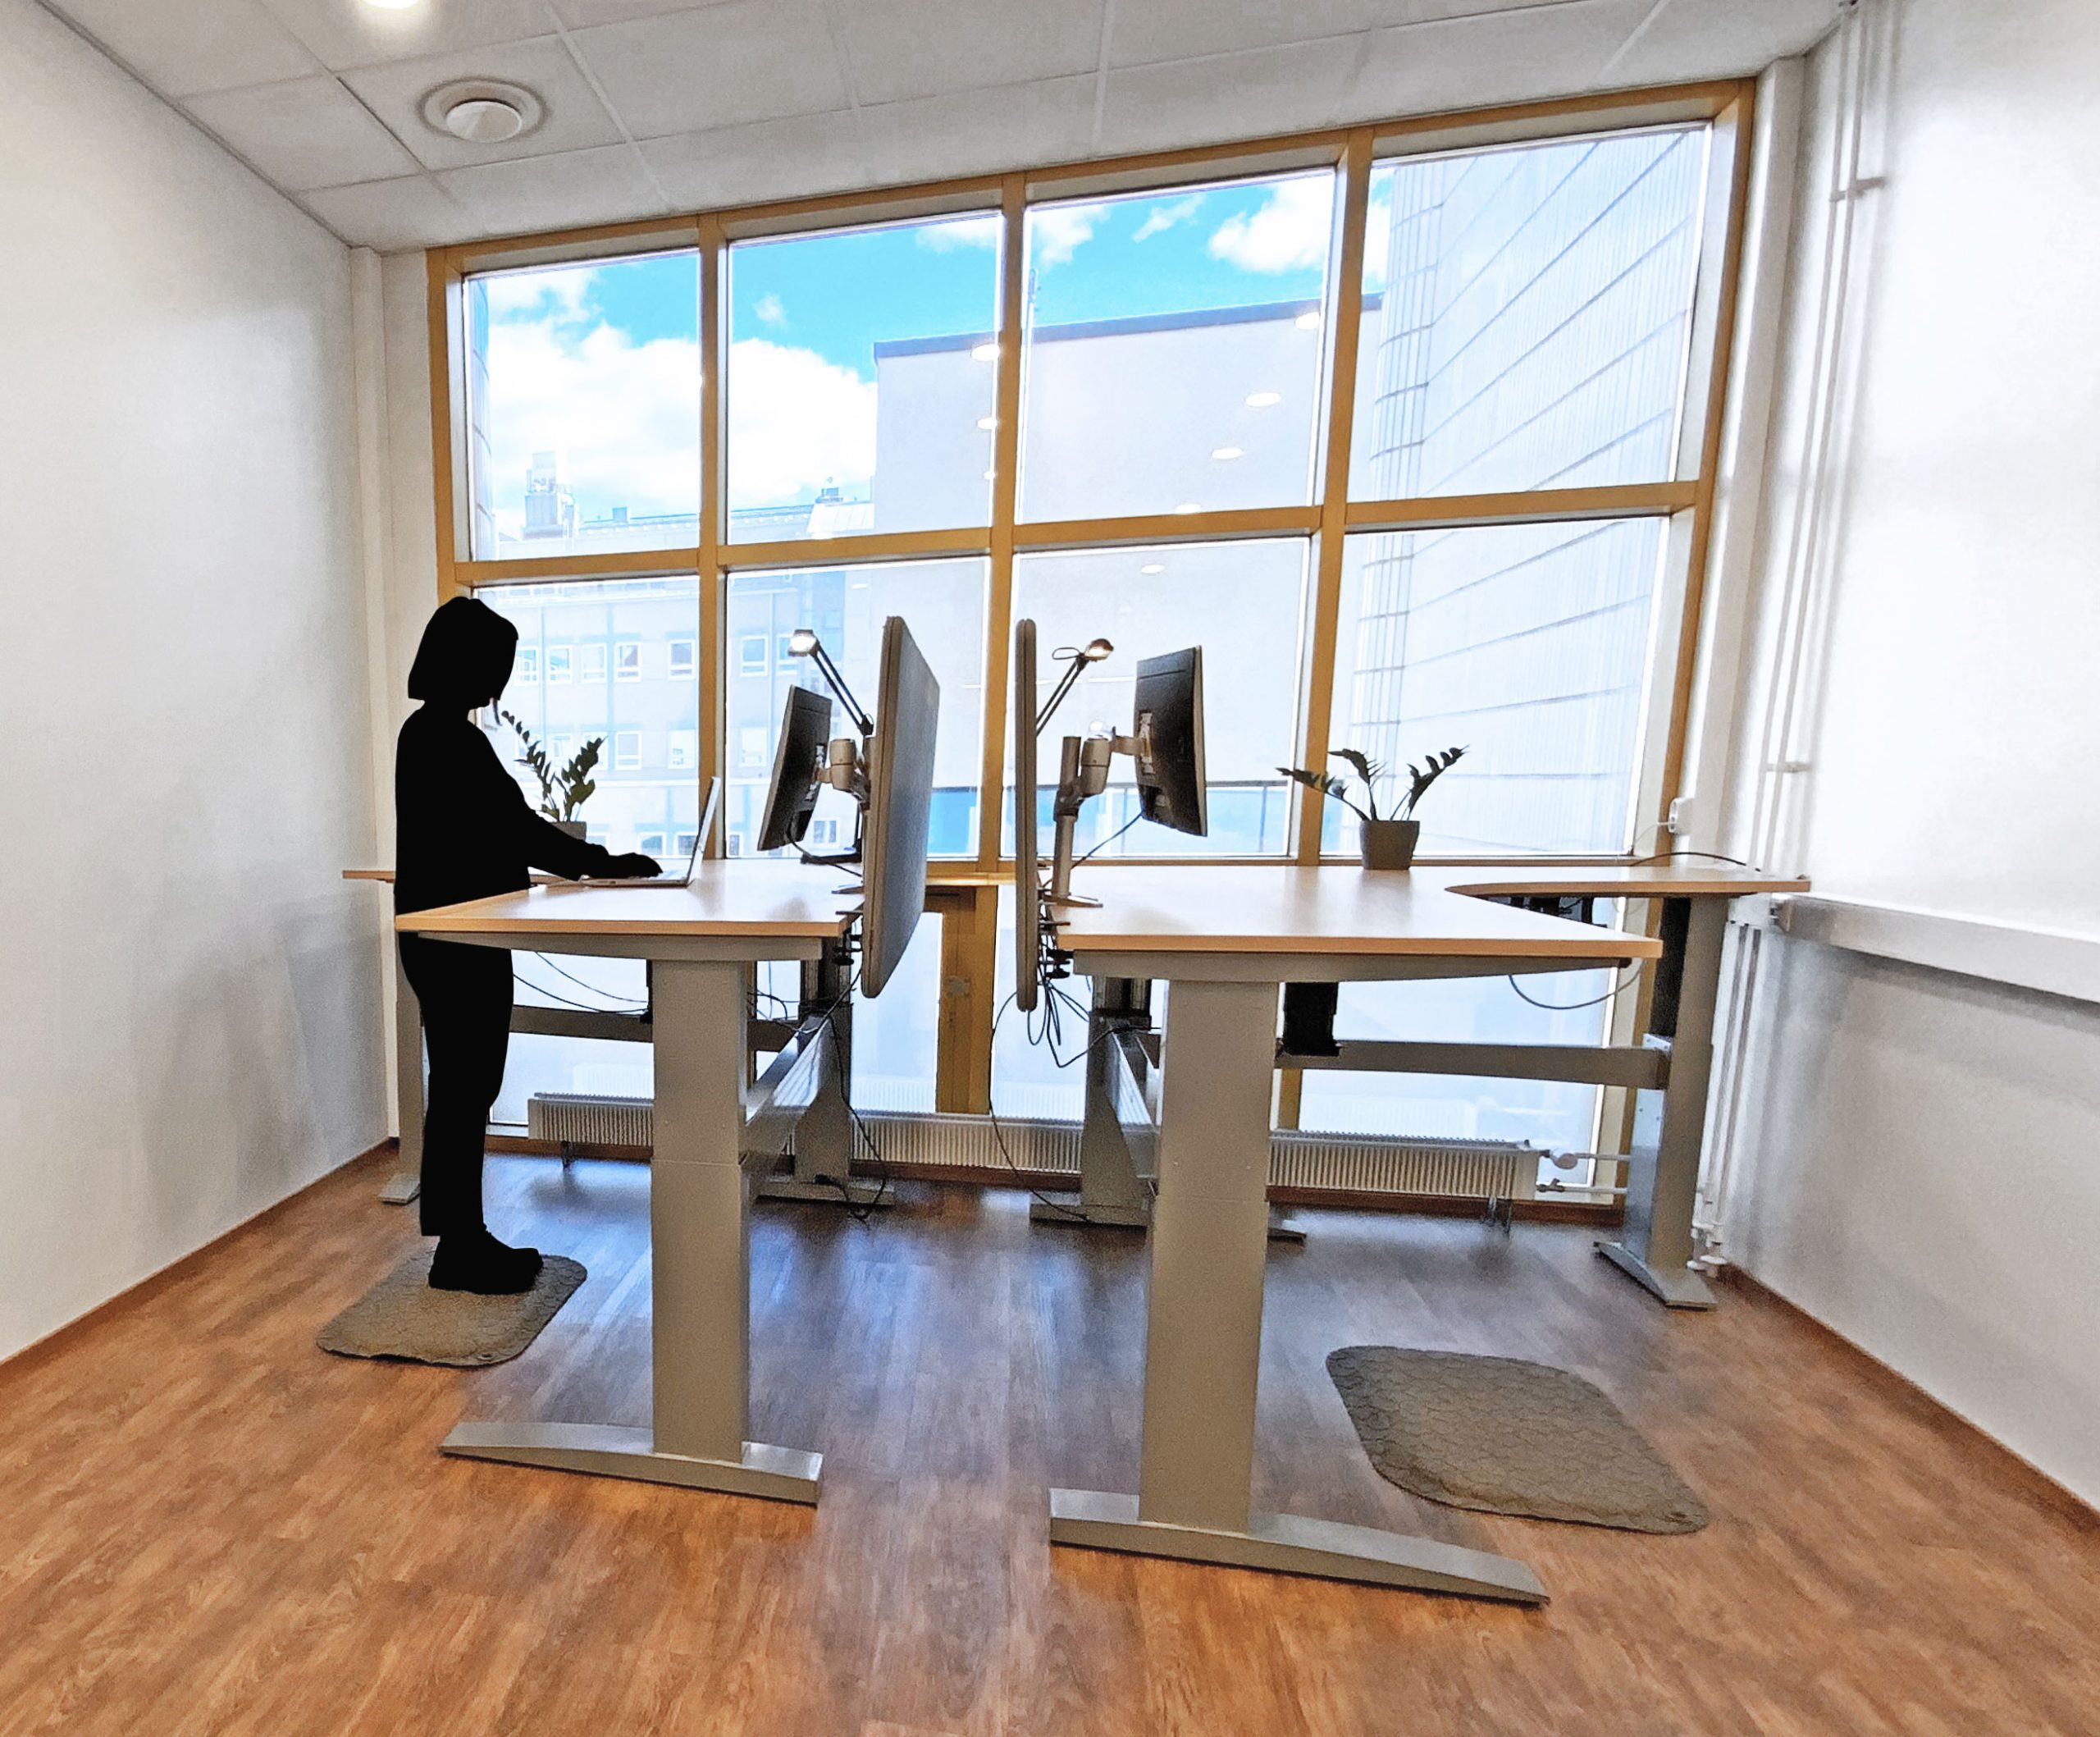 Working Space with electric standic desks